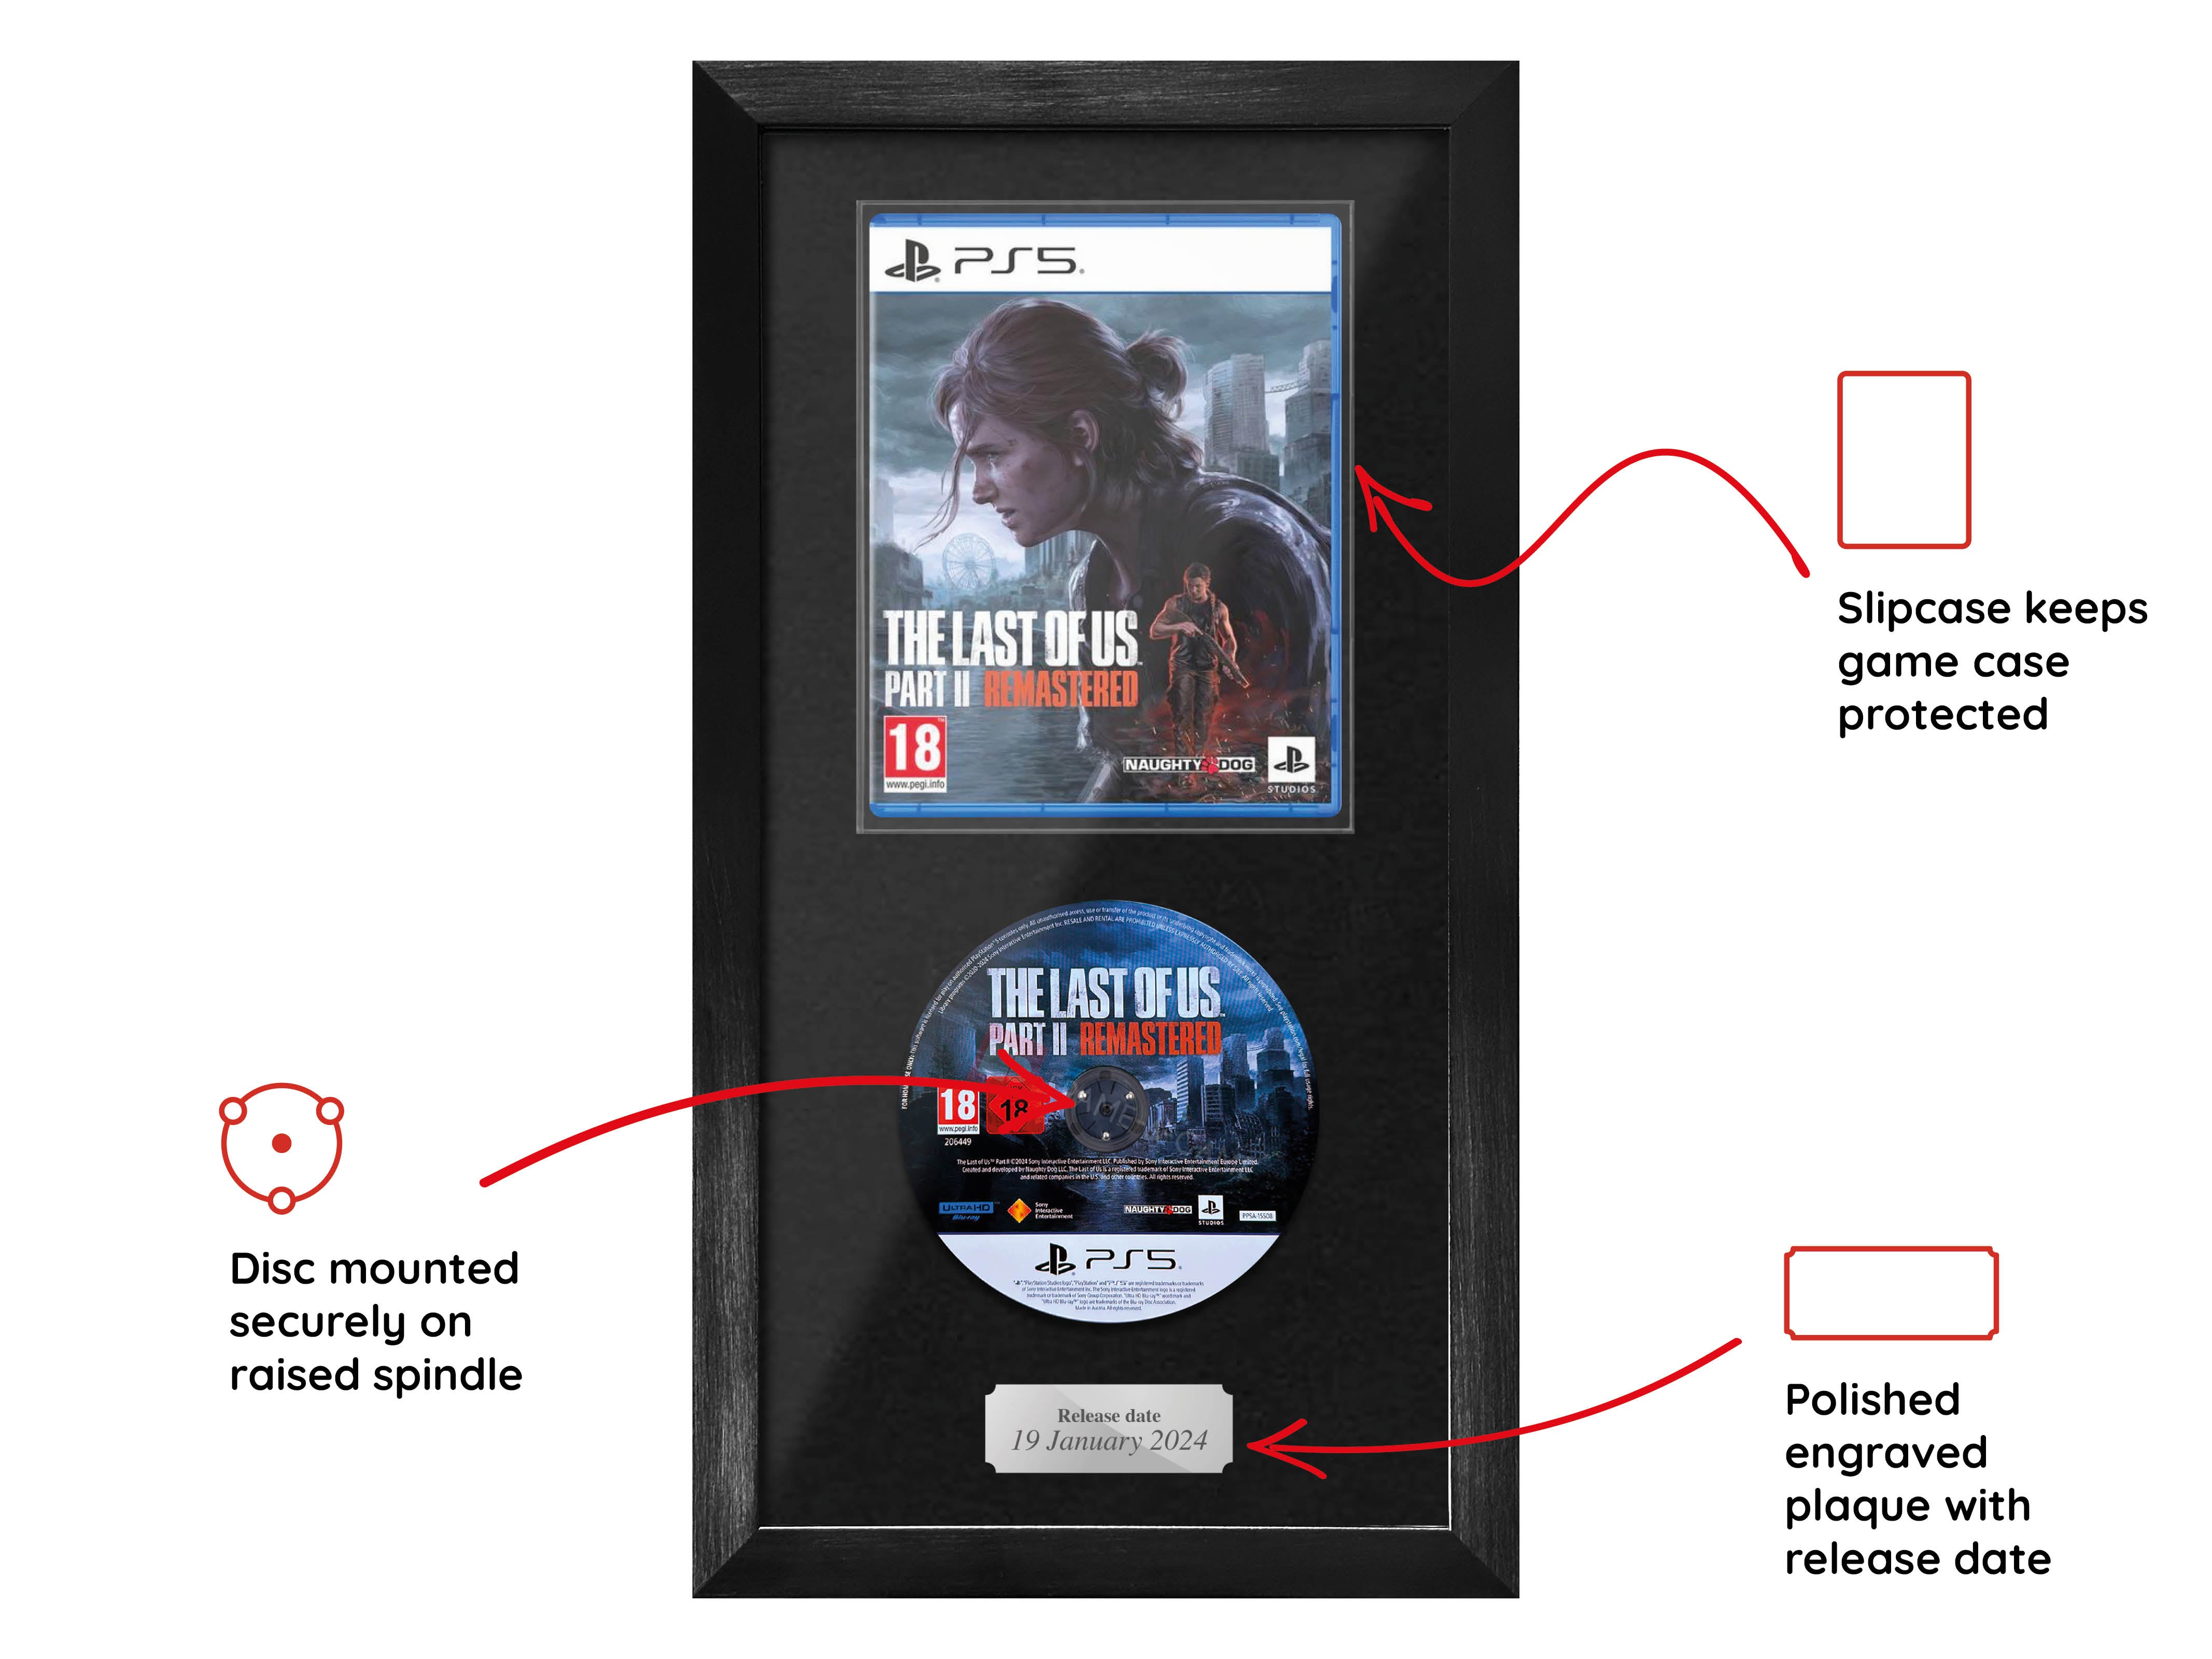 The Last of Us Part II: Remastered (Expo Range) Framed Game